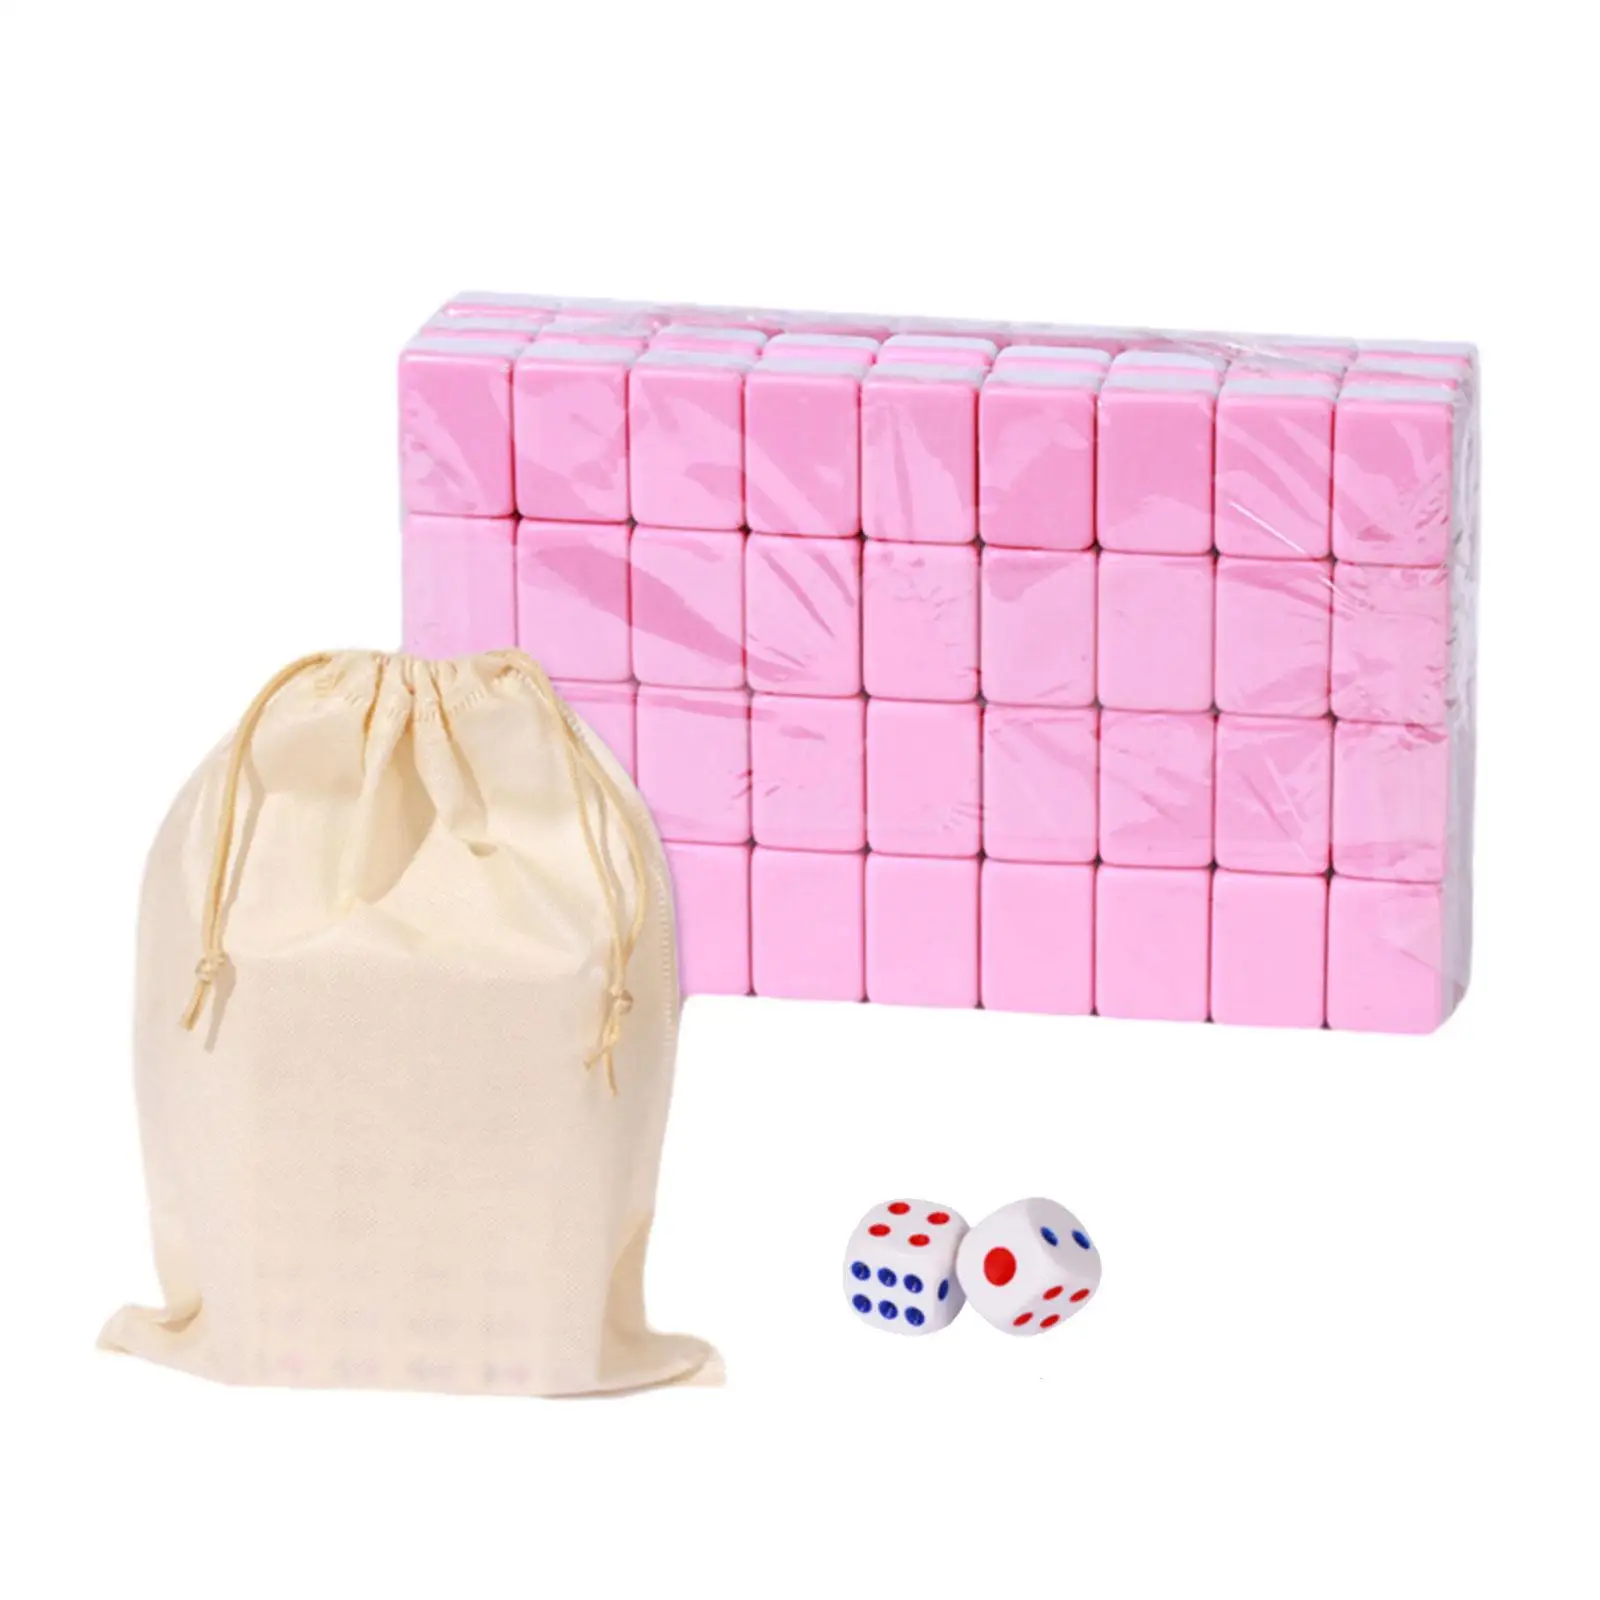 Travel Mahjong Set Family Leisure with Storage Bag Traditional Chinese Version Game with 144 Tiles Table Game Strategy Adults